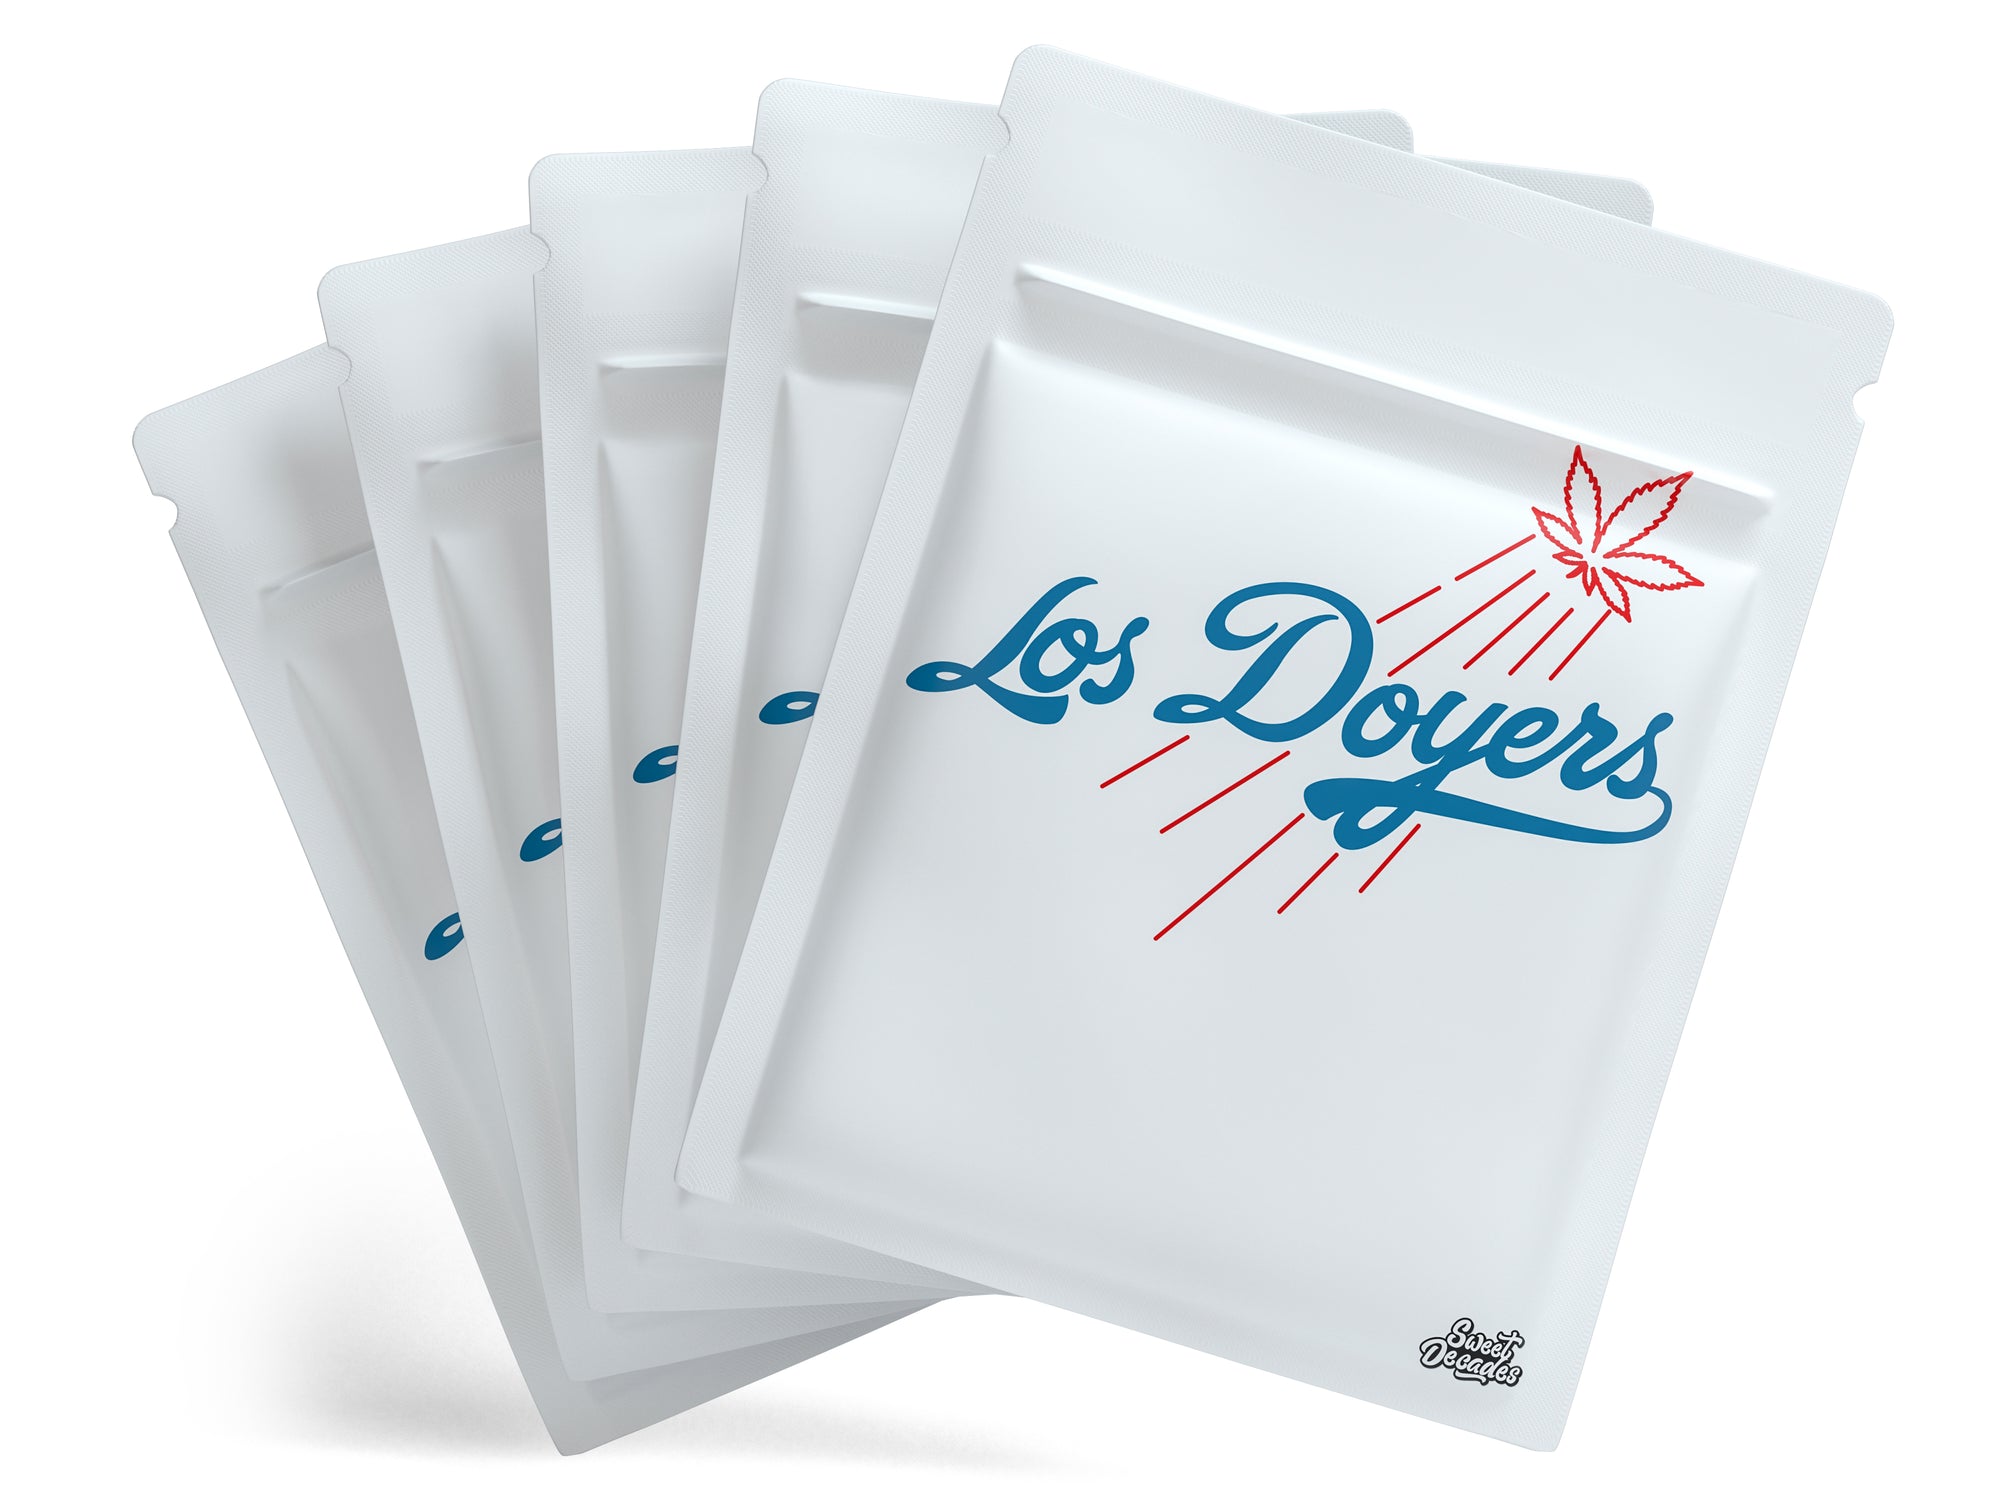 Los Doyers Sweet Decades Bags 4x6 Inch (Quarter Ounce, 7g)